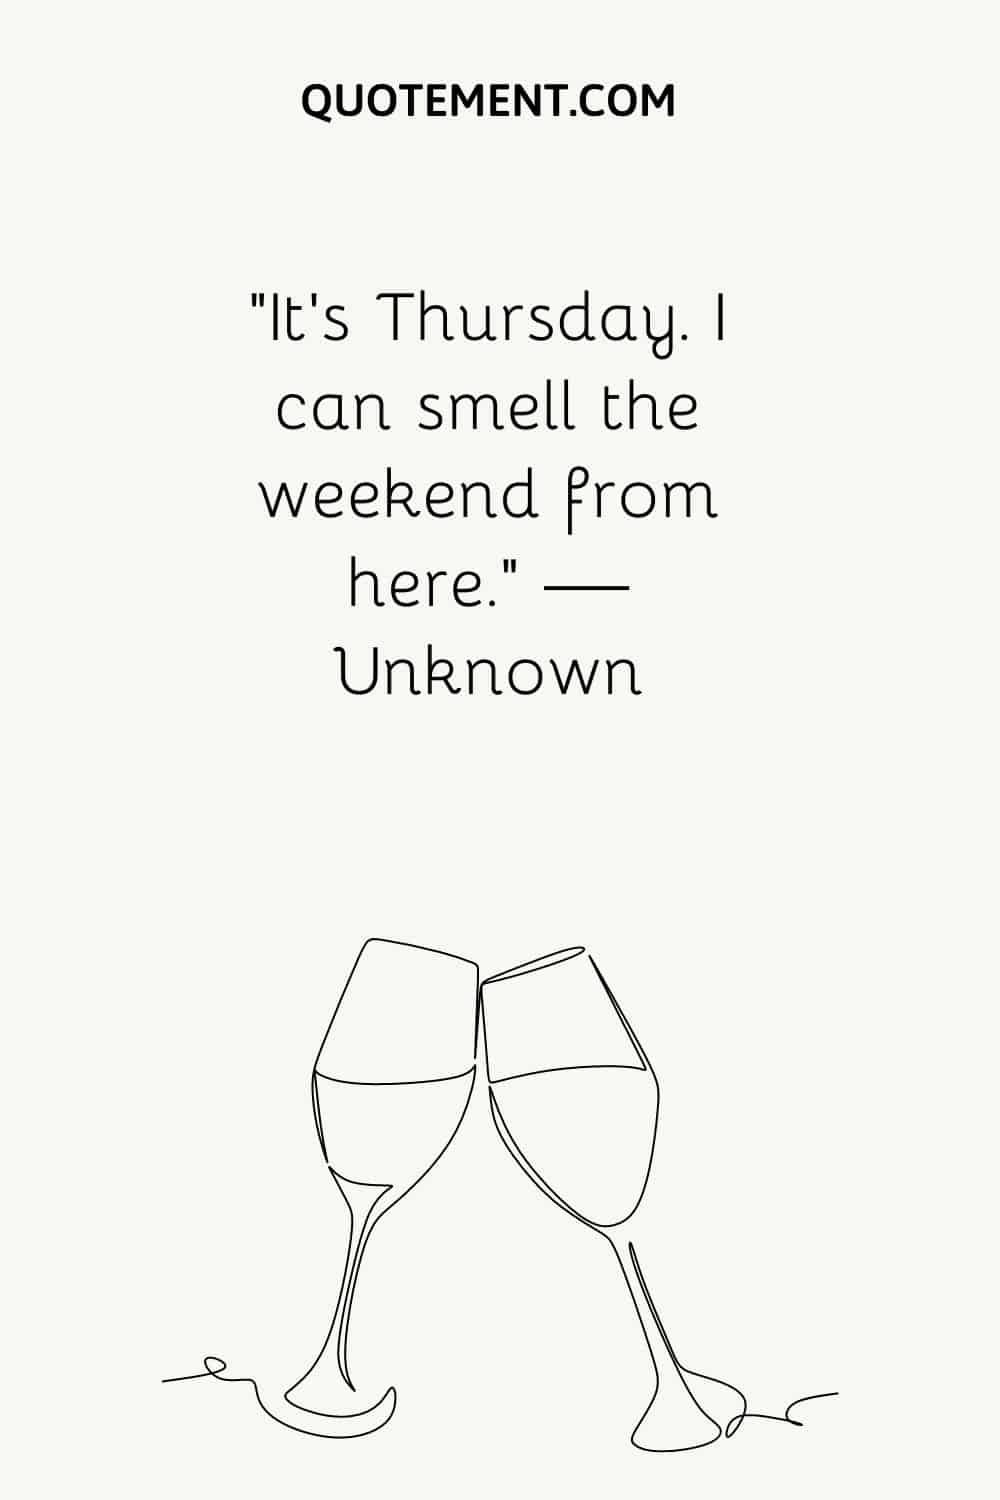 “It’s Thursday. I can smell the weekend from here.” — Unknown